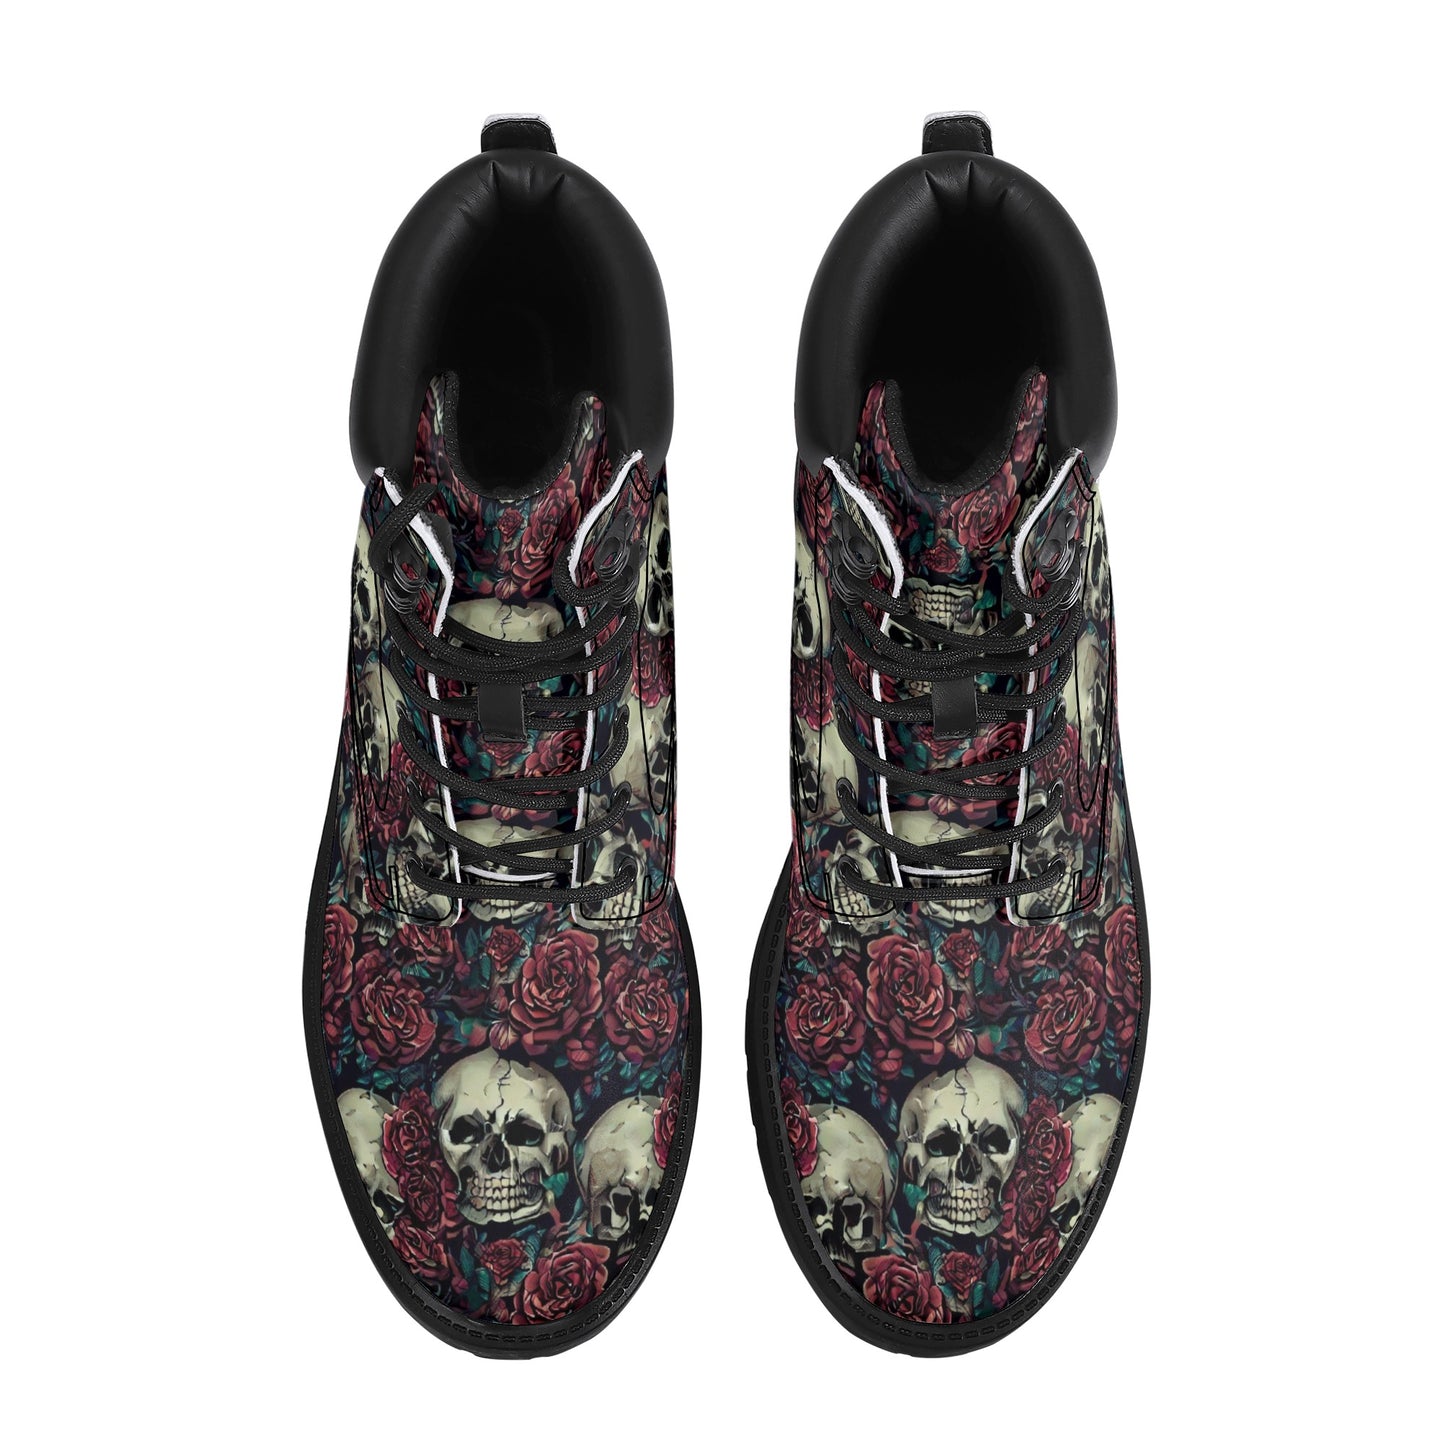 Artistic Expression: Leather Boots Featuring Striking Skulls & Roses Design